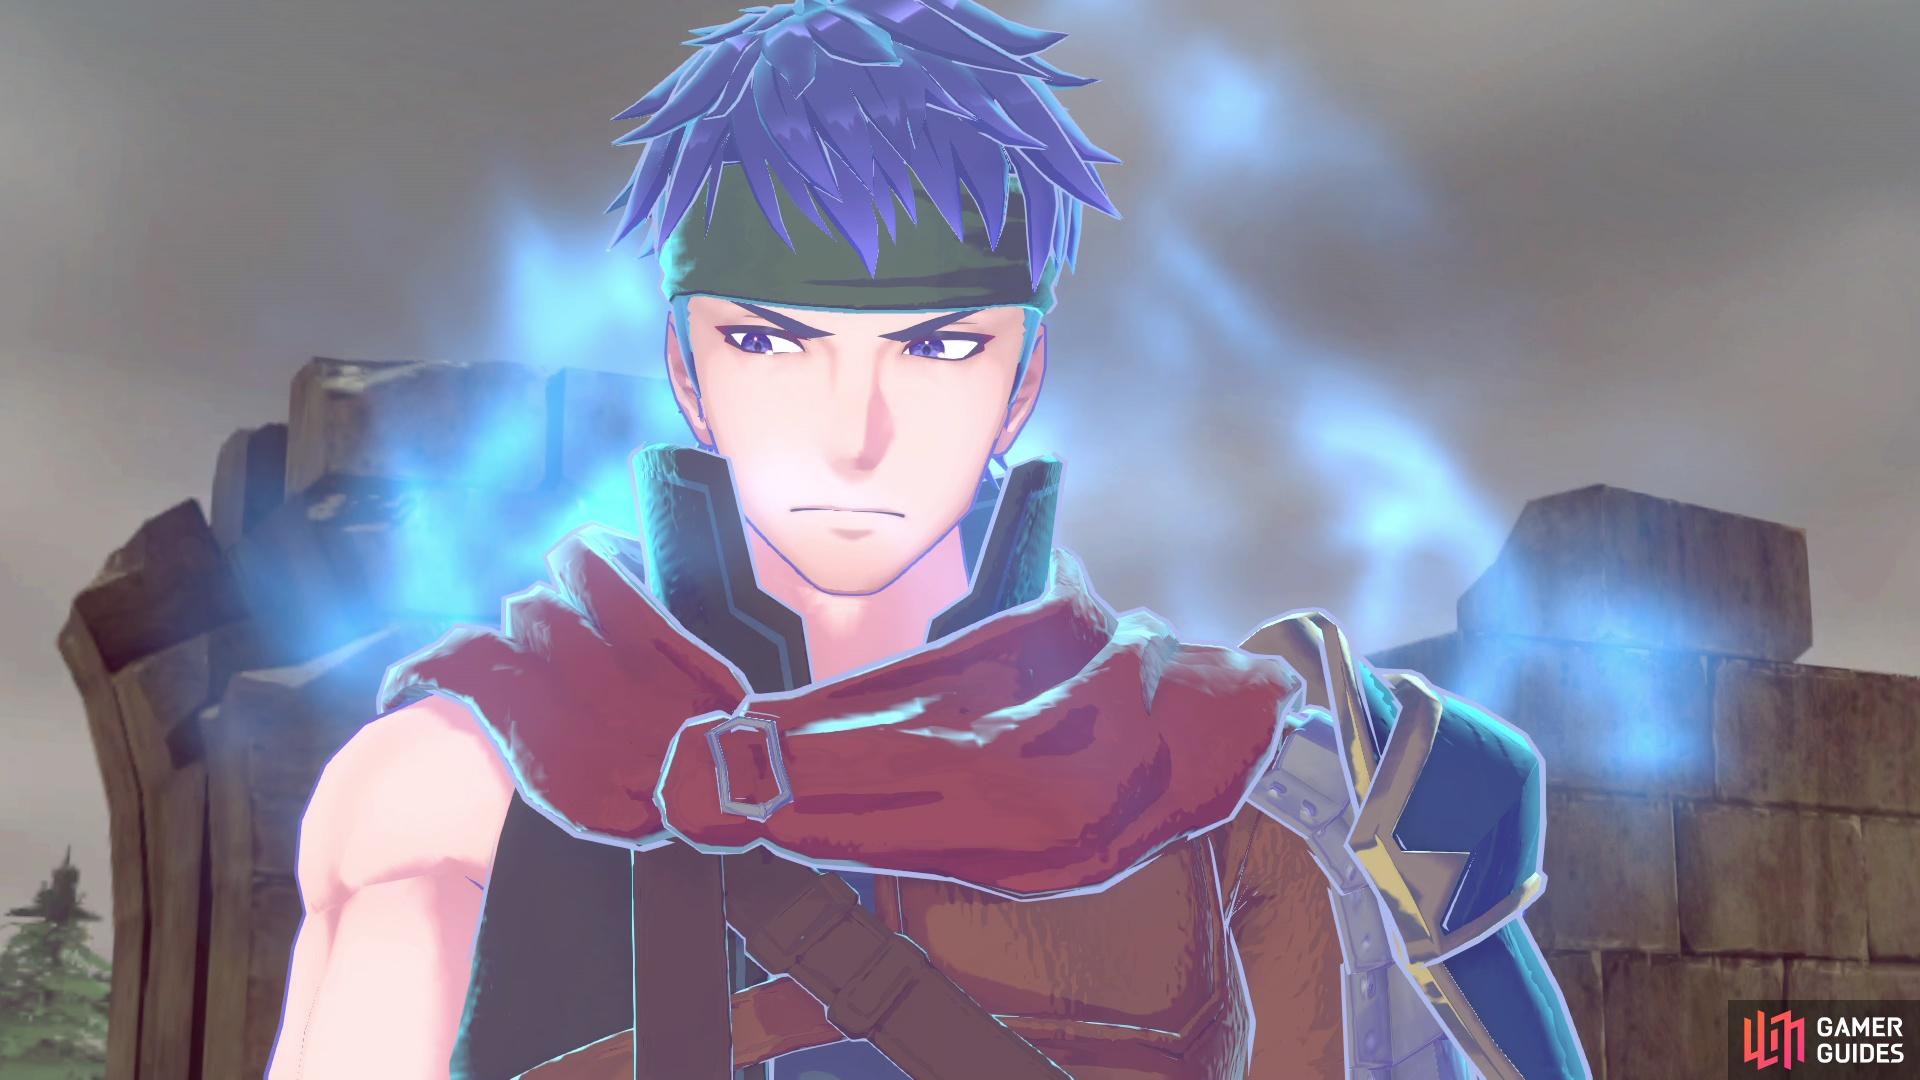 You will unlock Ike’s Paralogue at the start of Chapter 14.